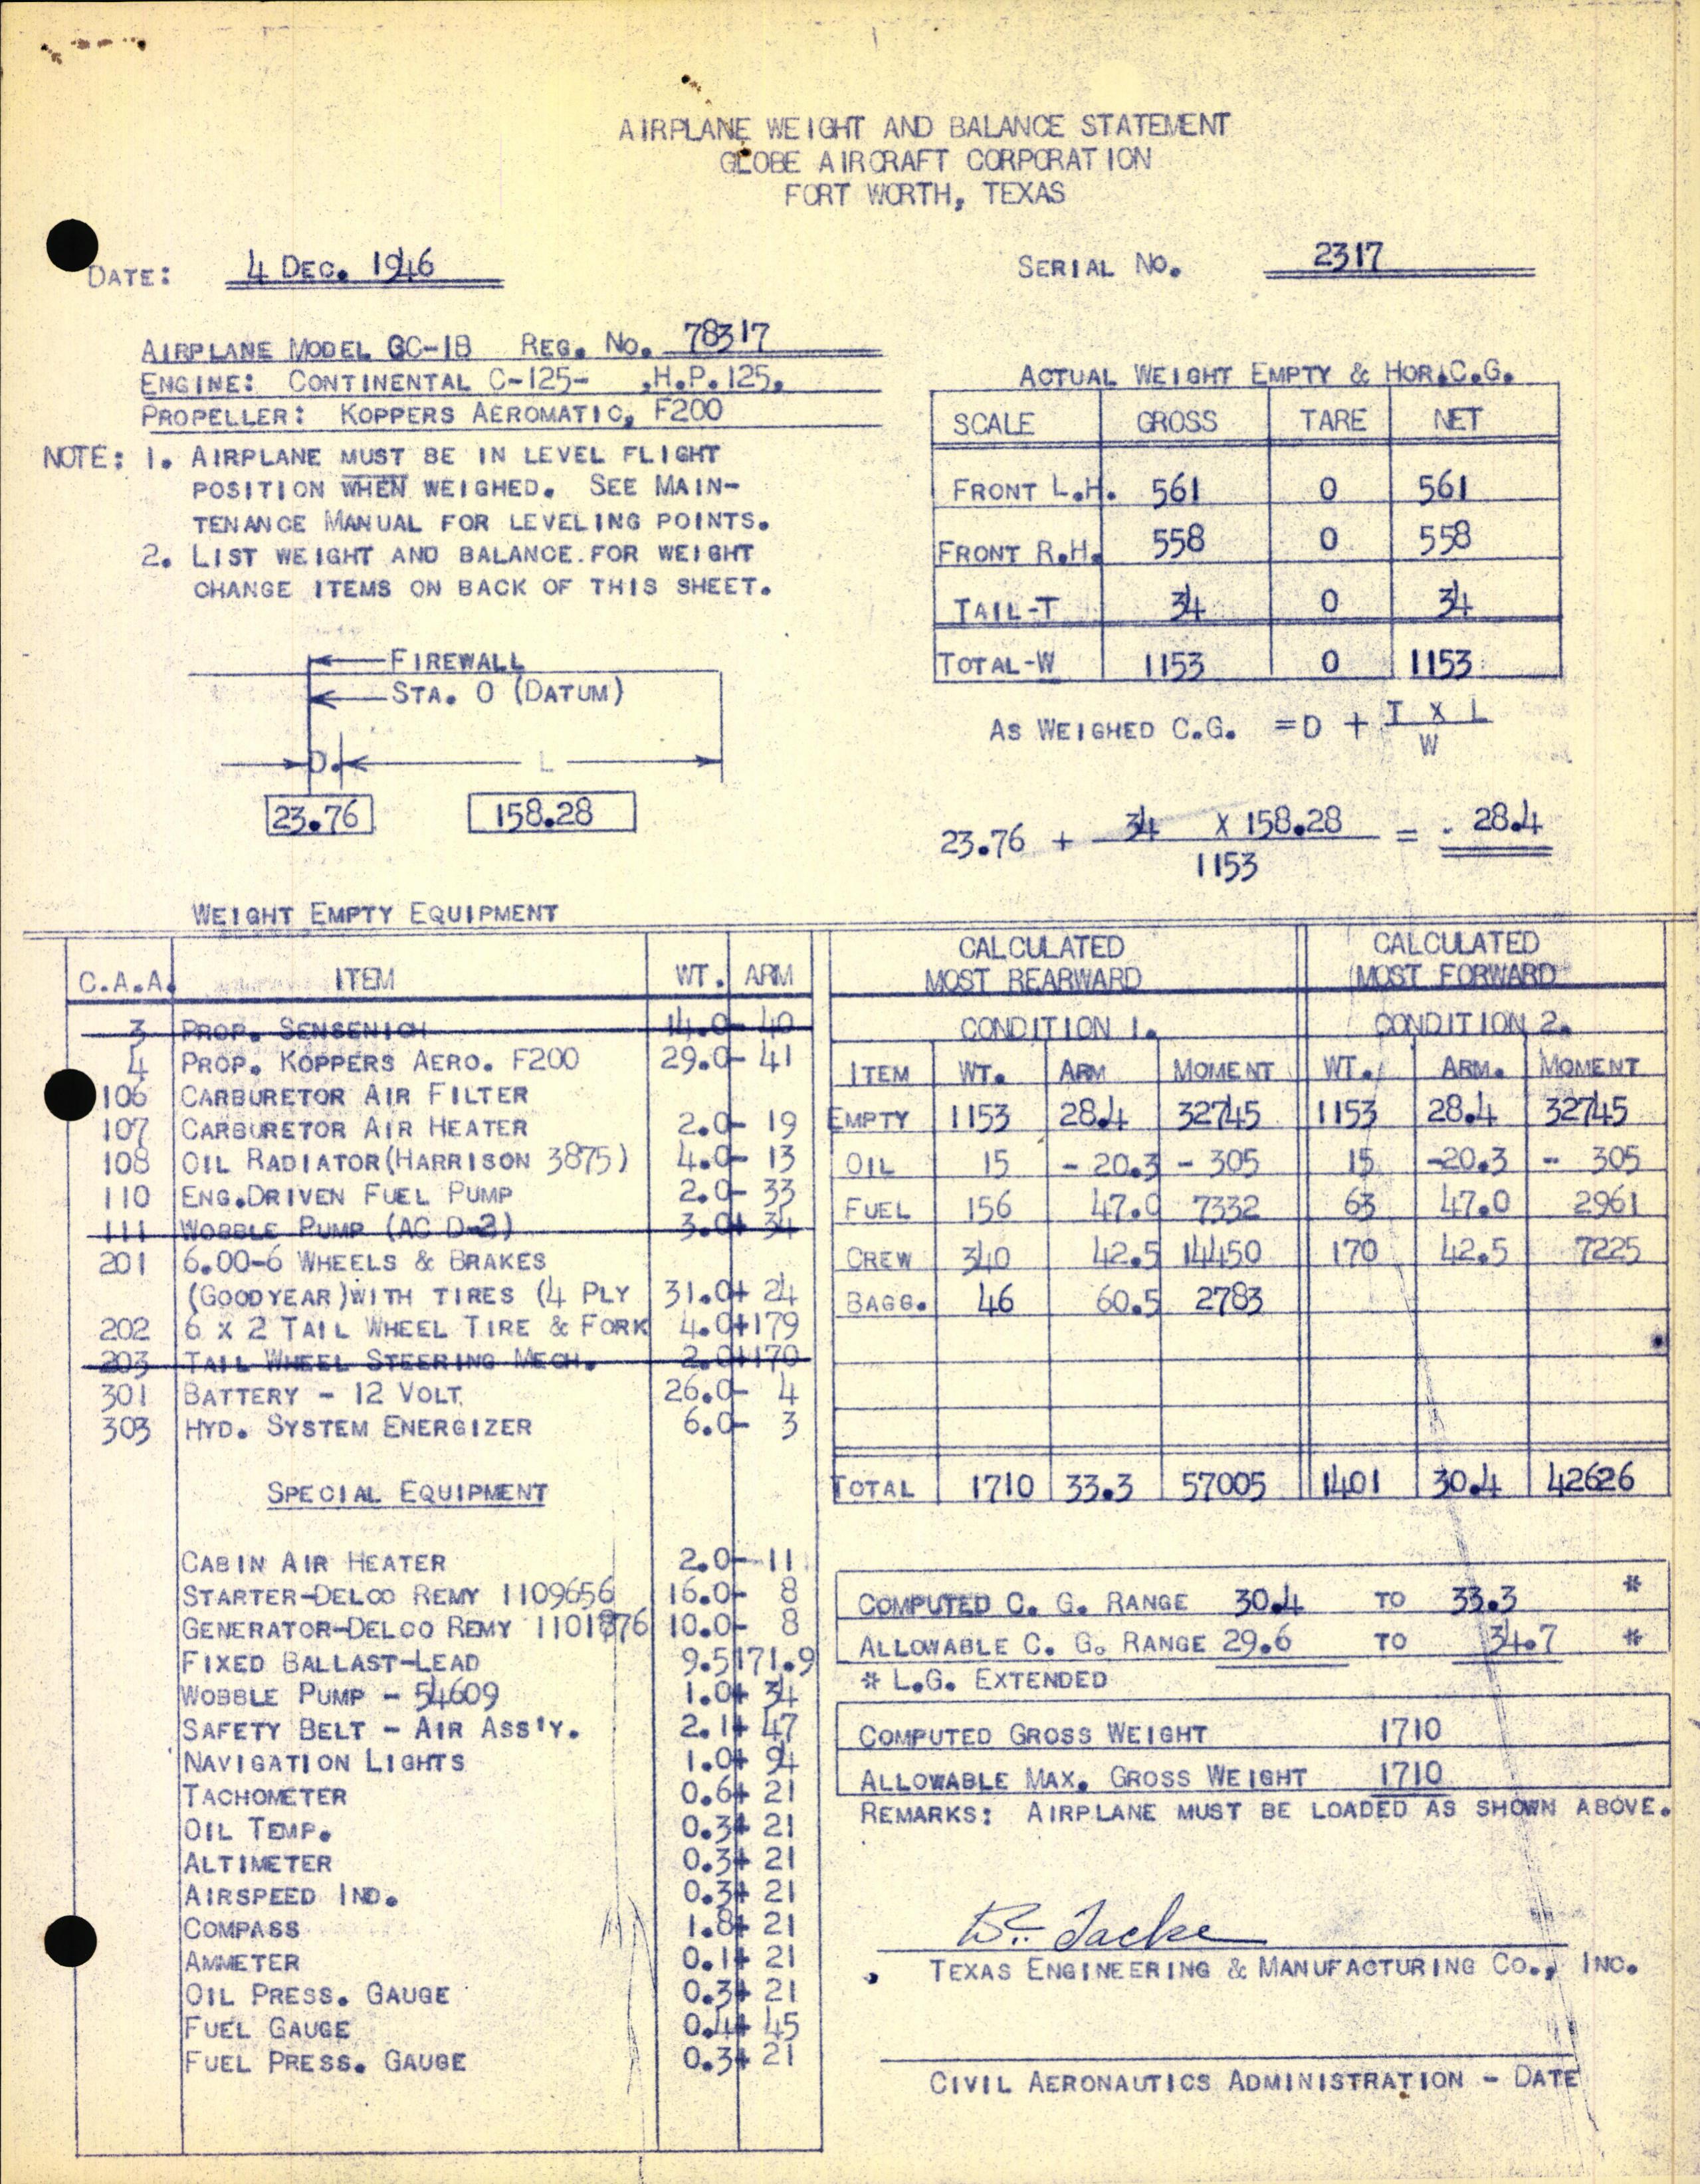 Sample page 3 from AirCorps Library document: Technical Information for Serial Number 2317